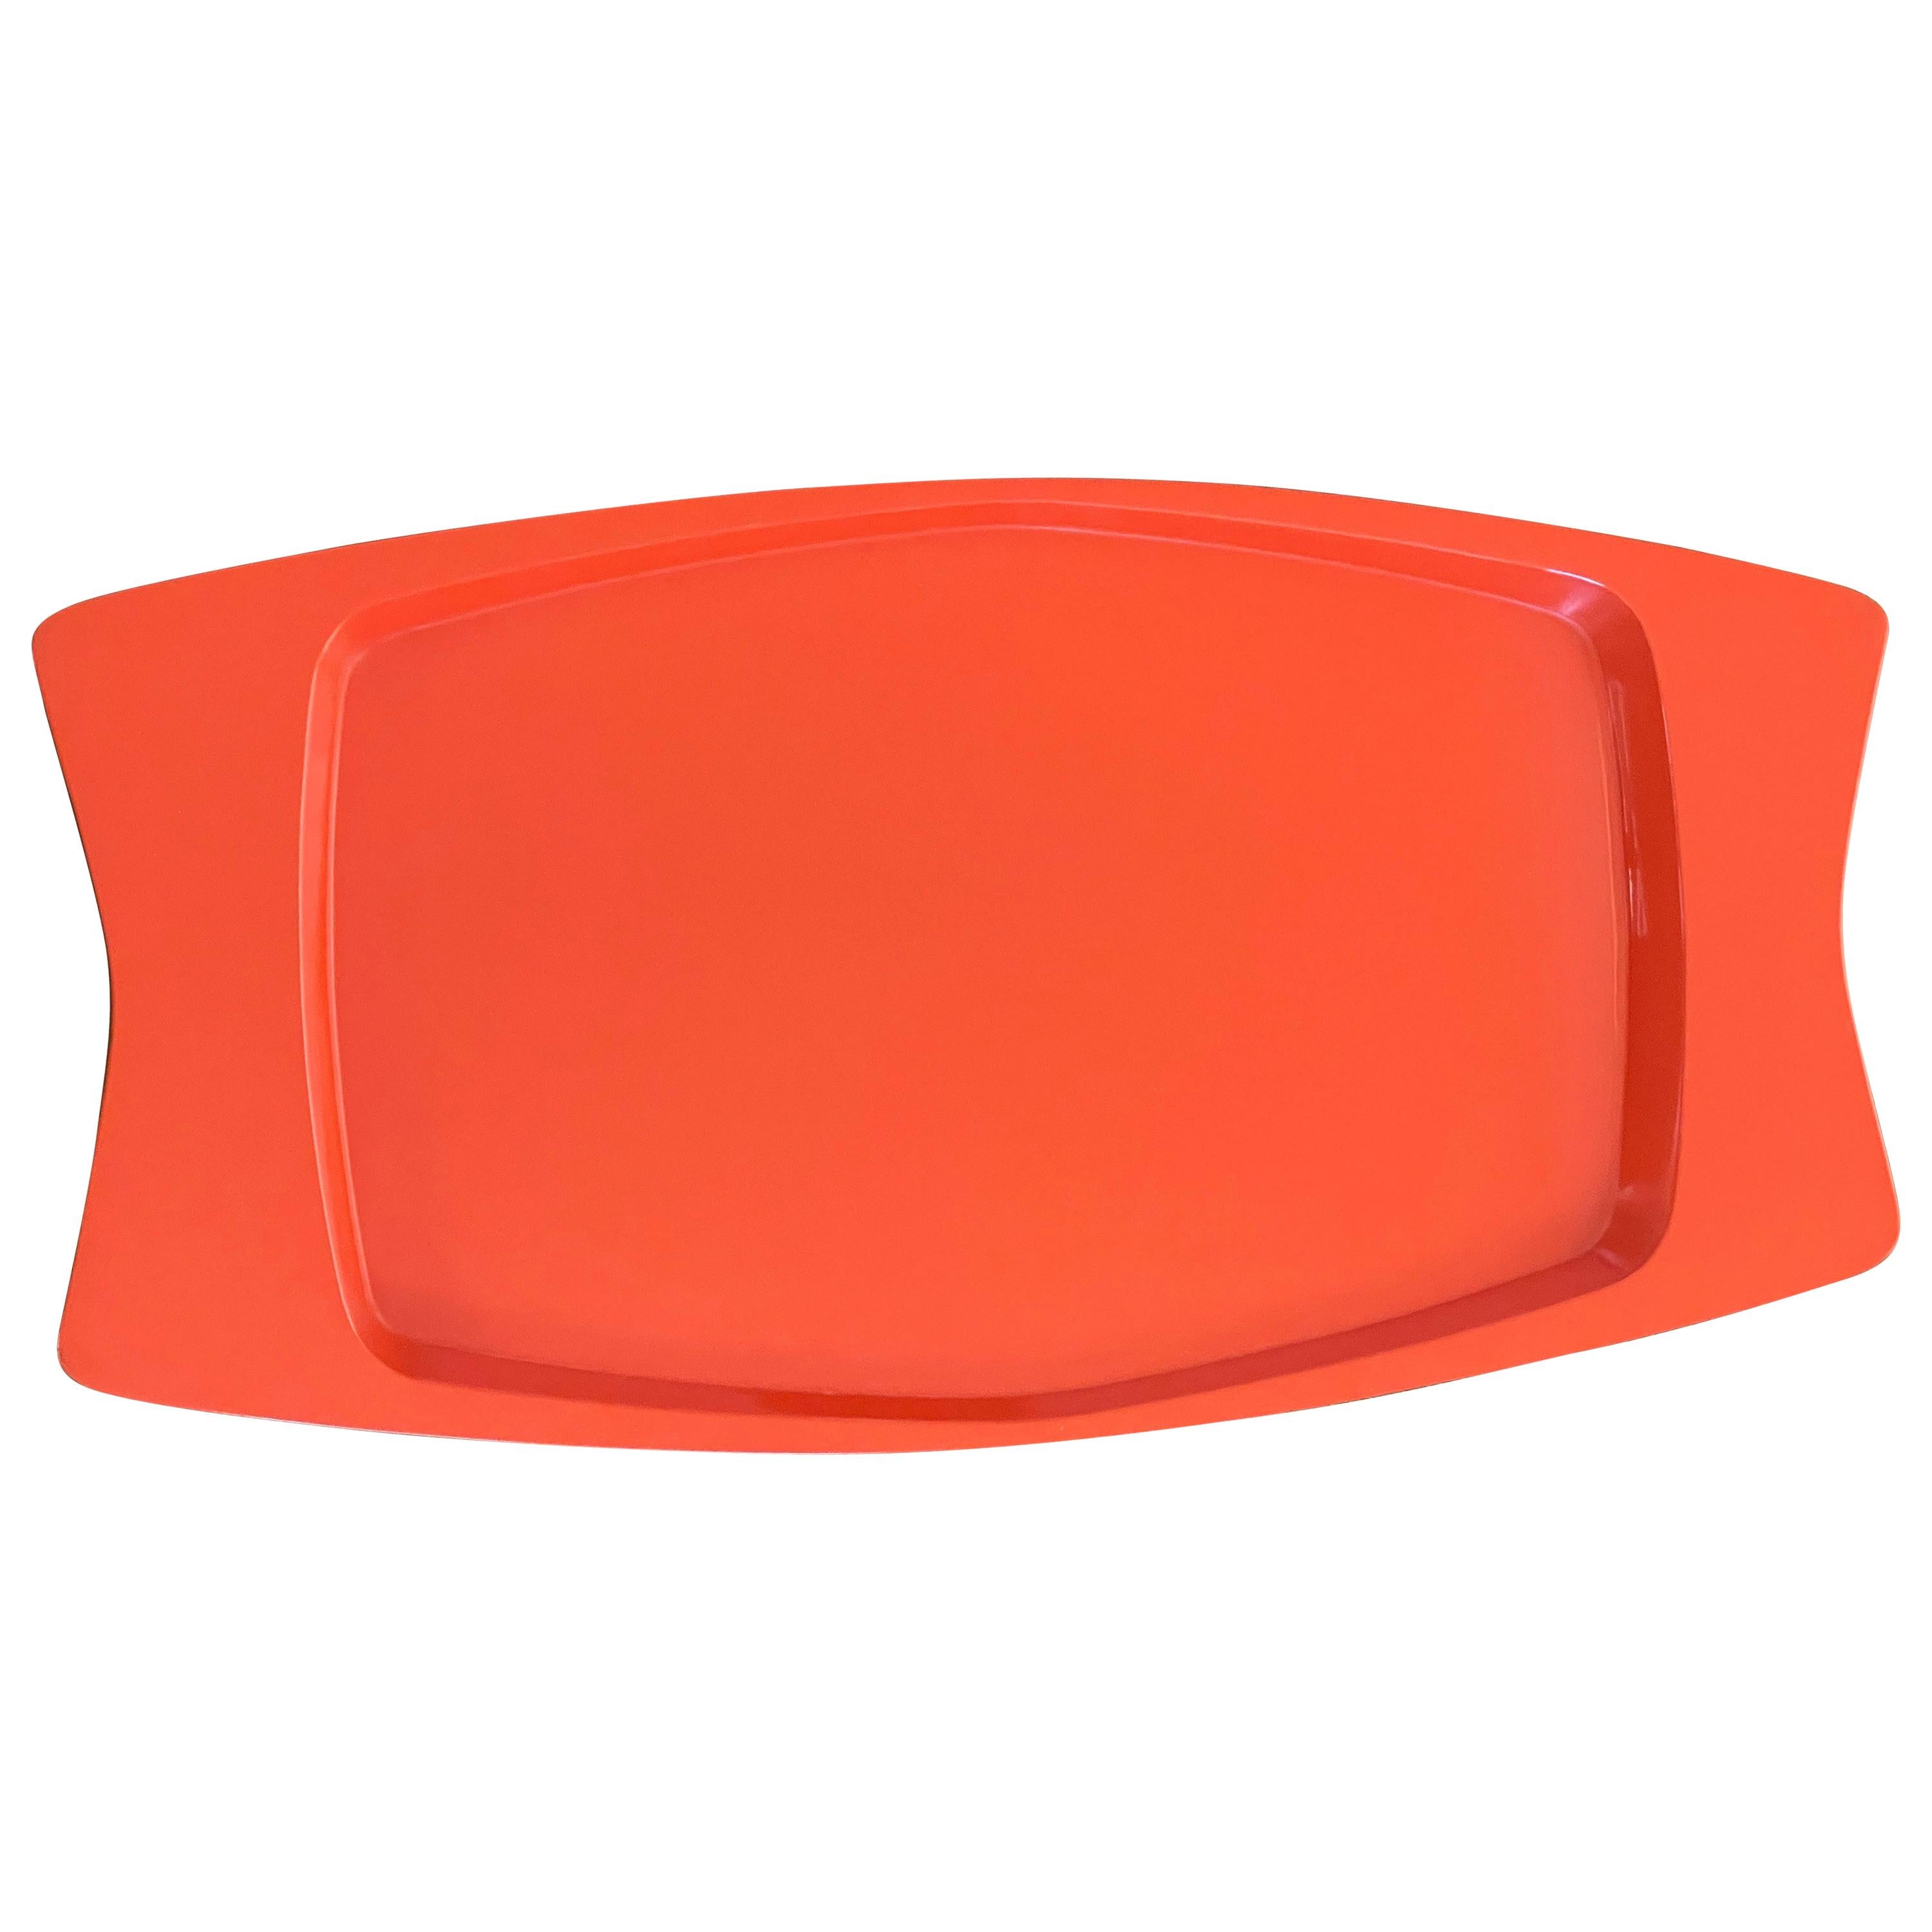 Extra Large Orange Lacquer Tray by Jens Quistgaard for Dansk- Early Production